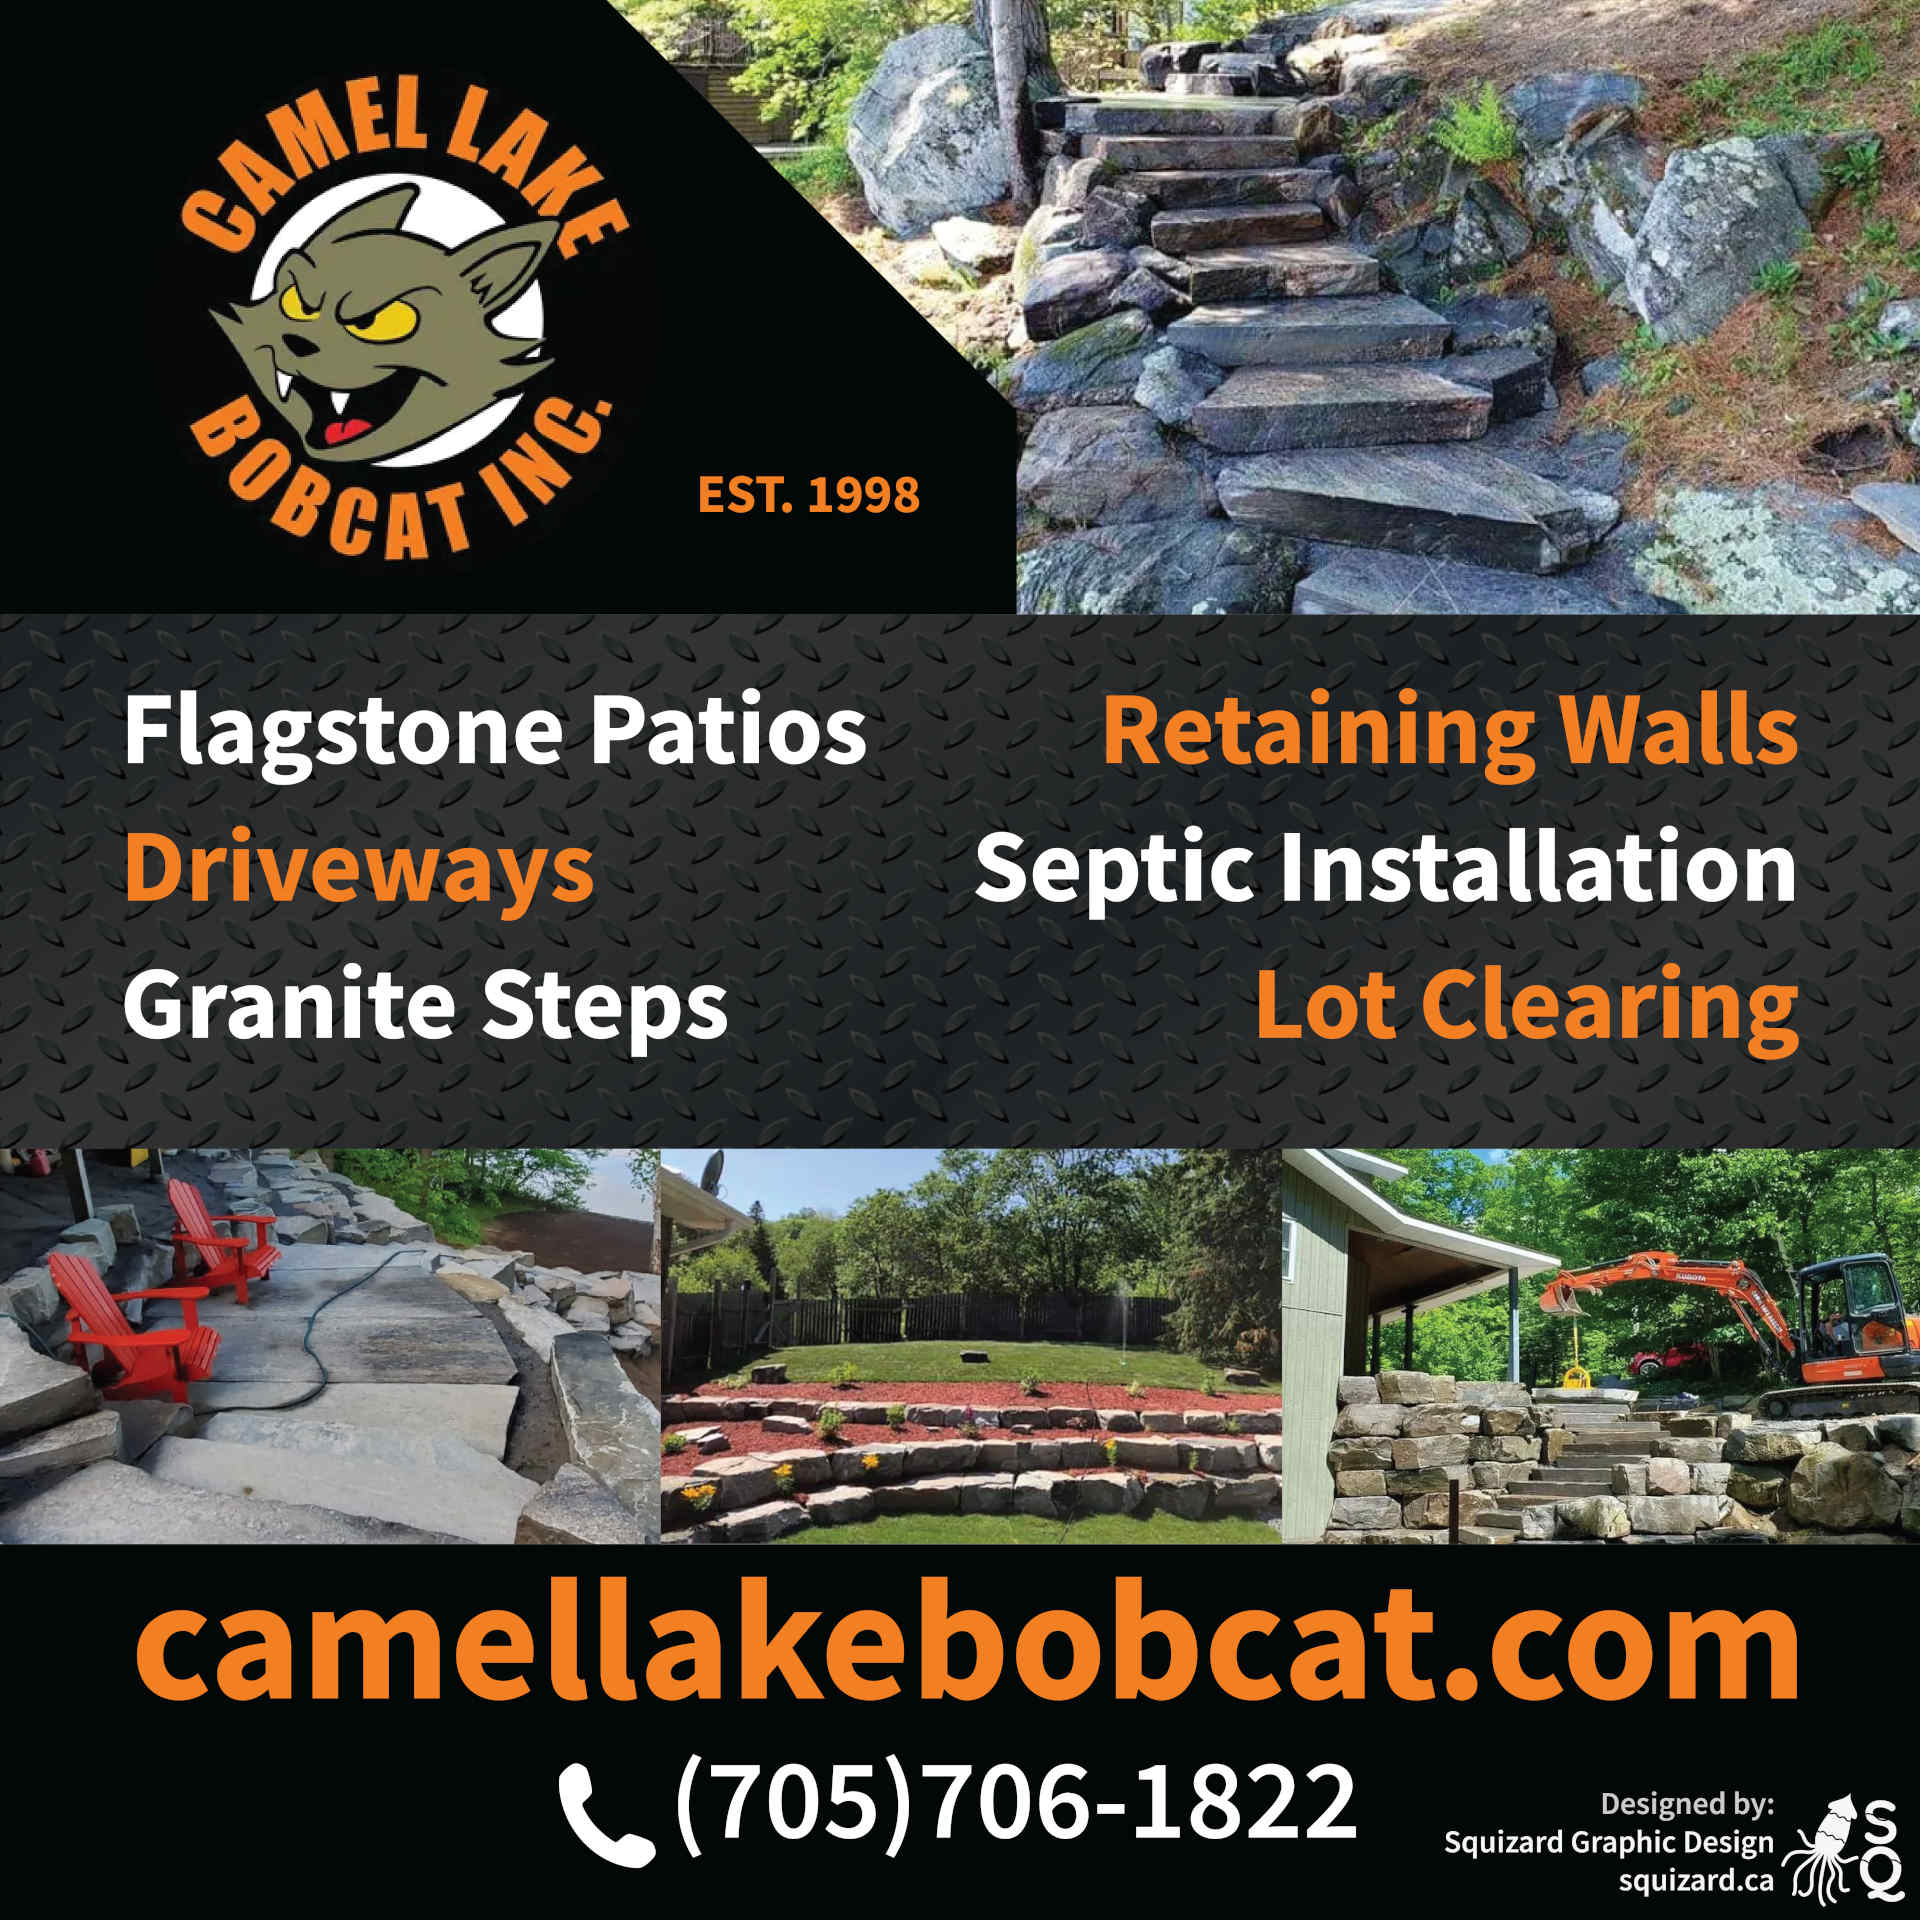 A Poster for a landscaping construction company